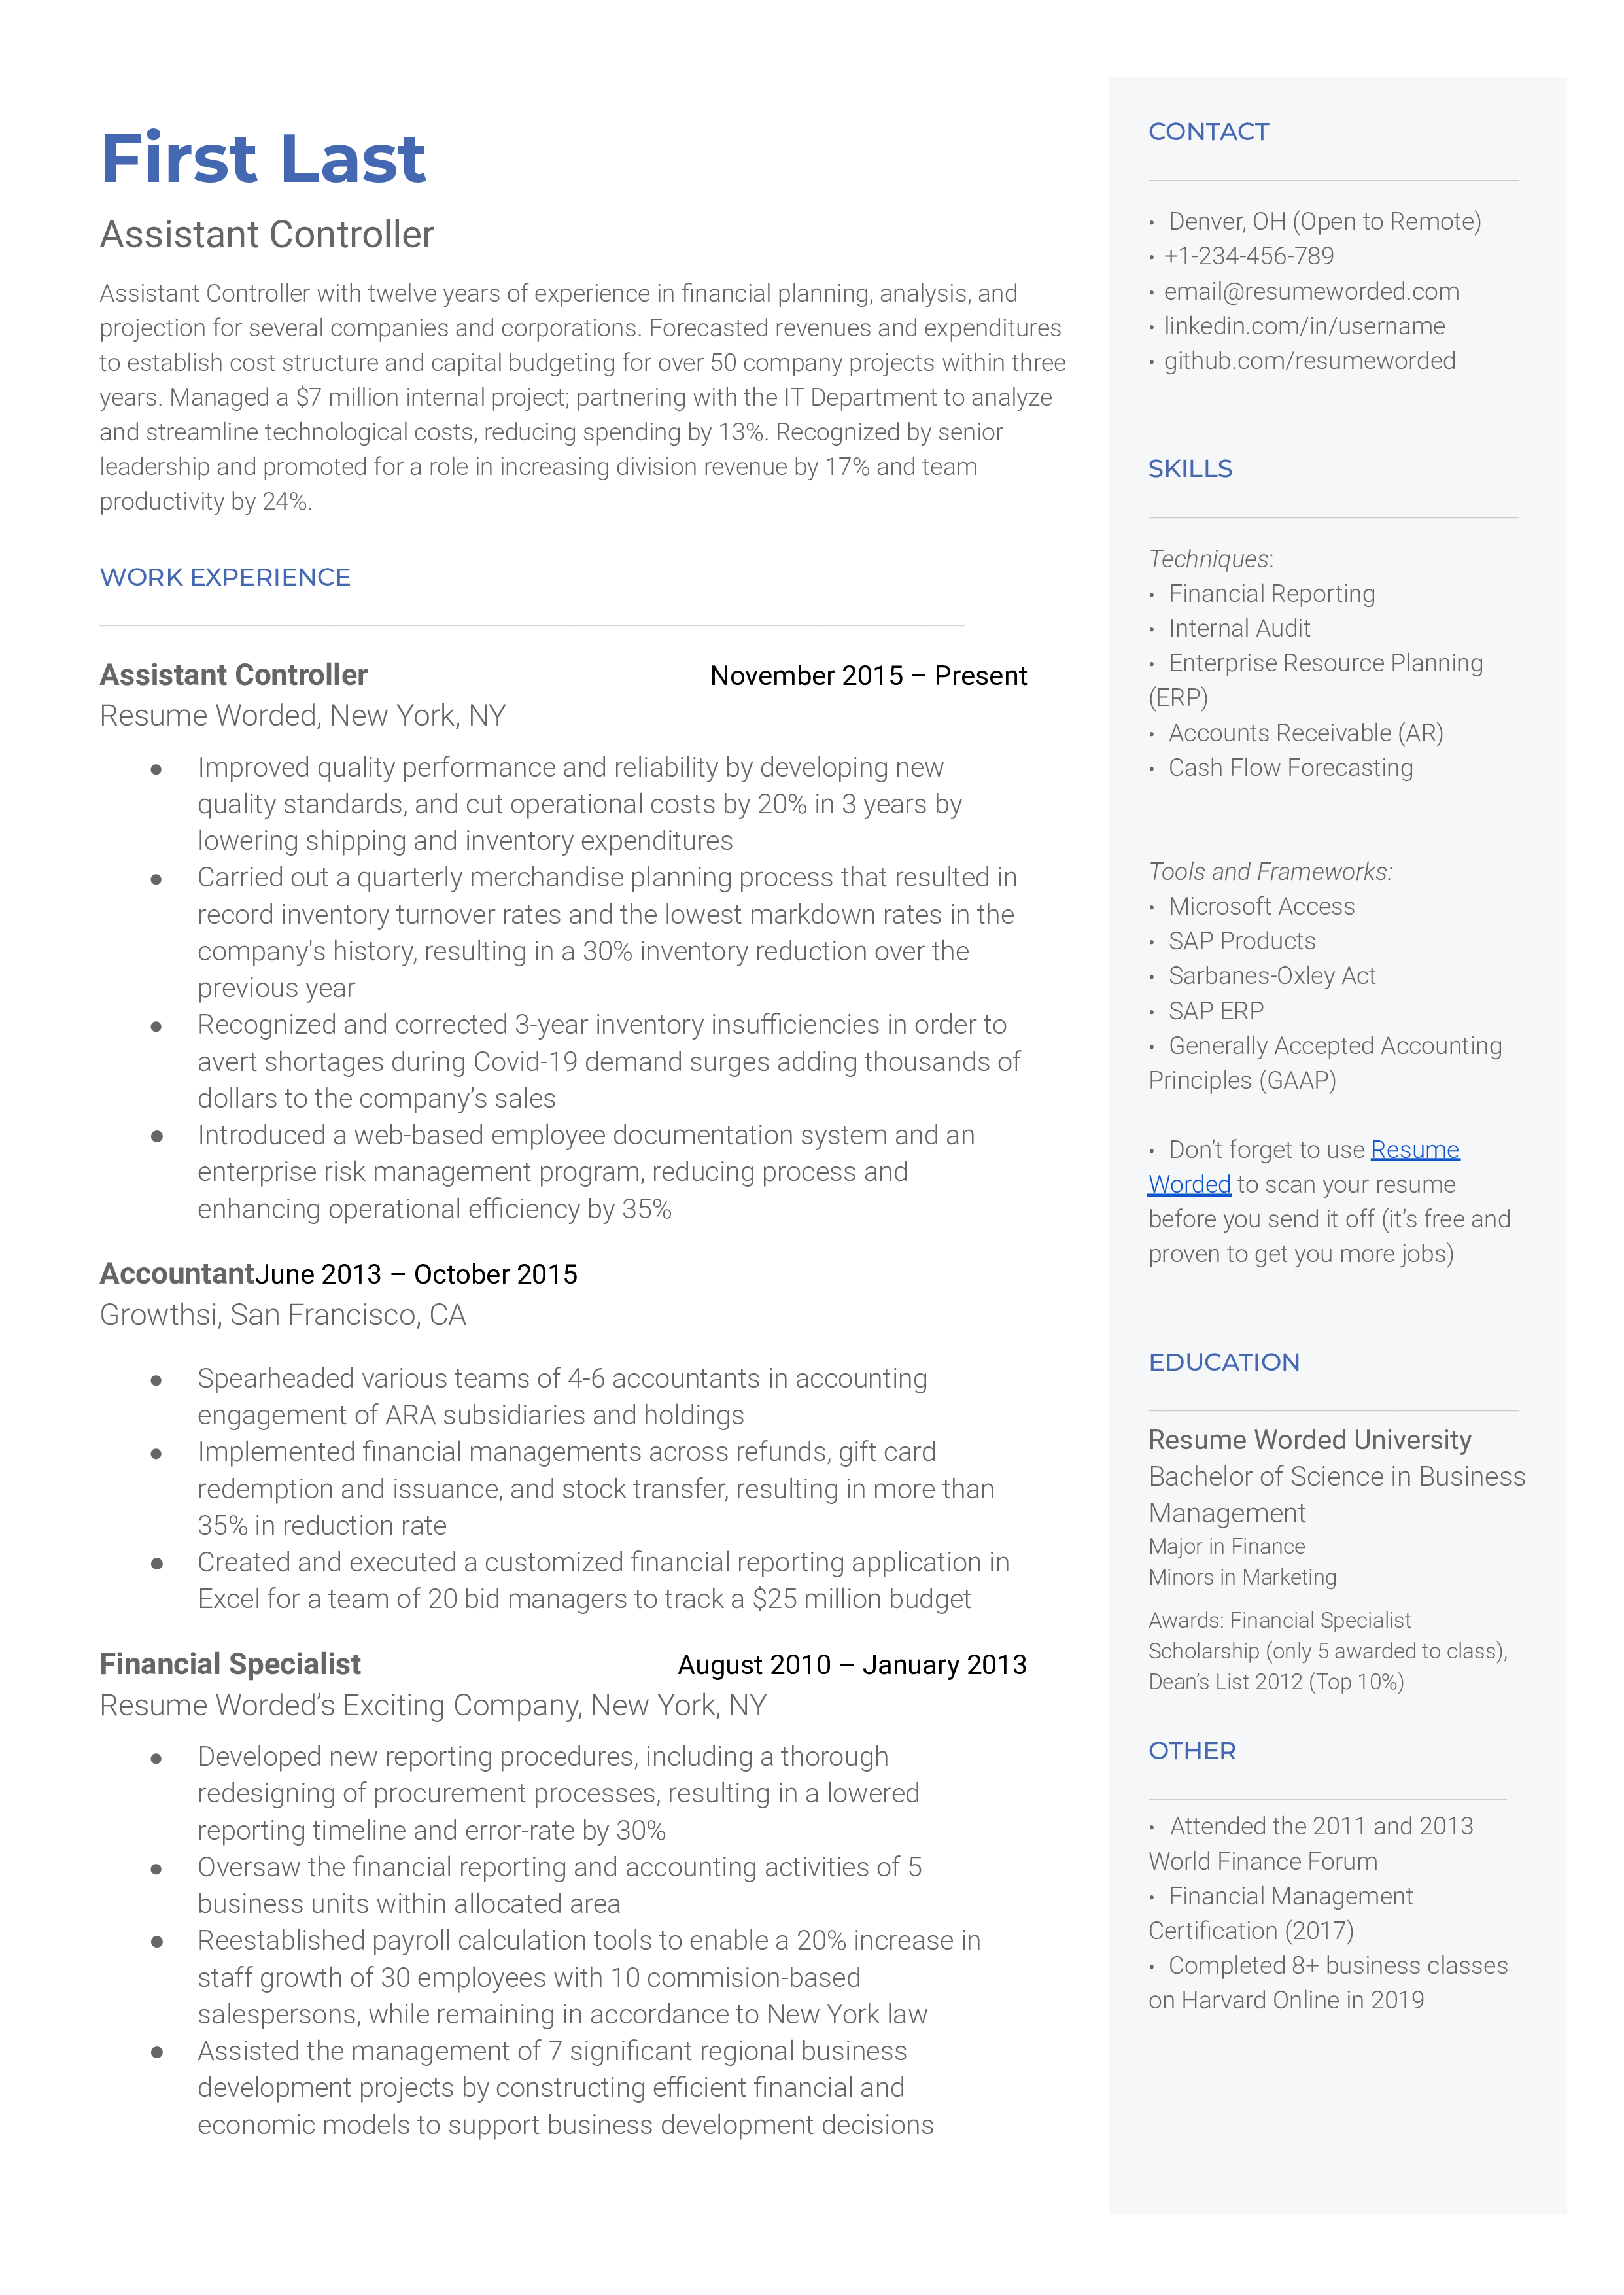 Assistant Controller Resume Sample